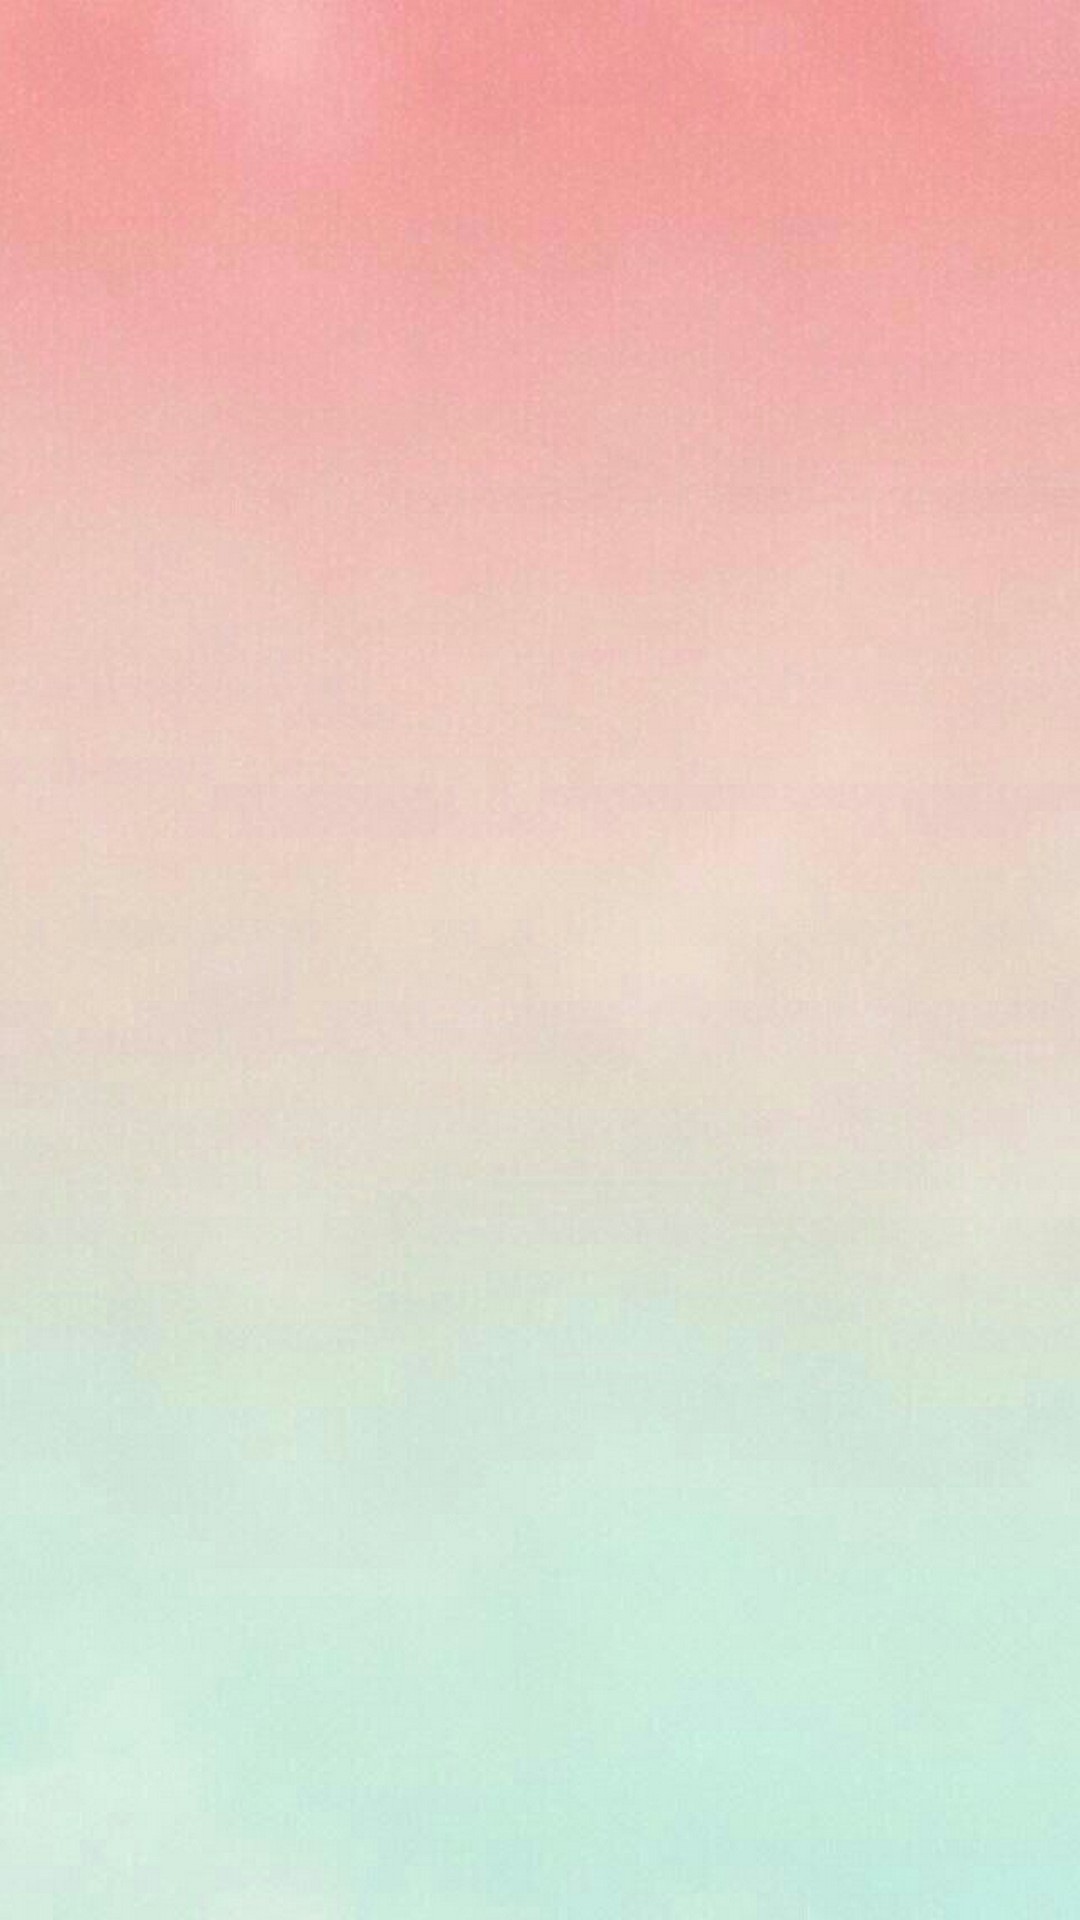 cool wallpapers for girls,pink,blue,sky,turquoise,peach